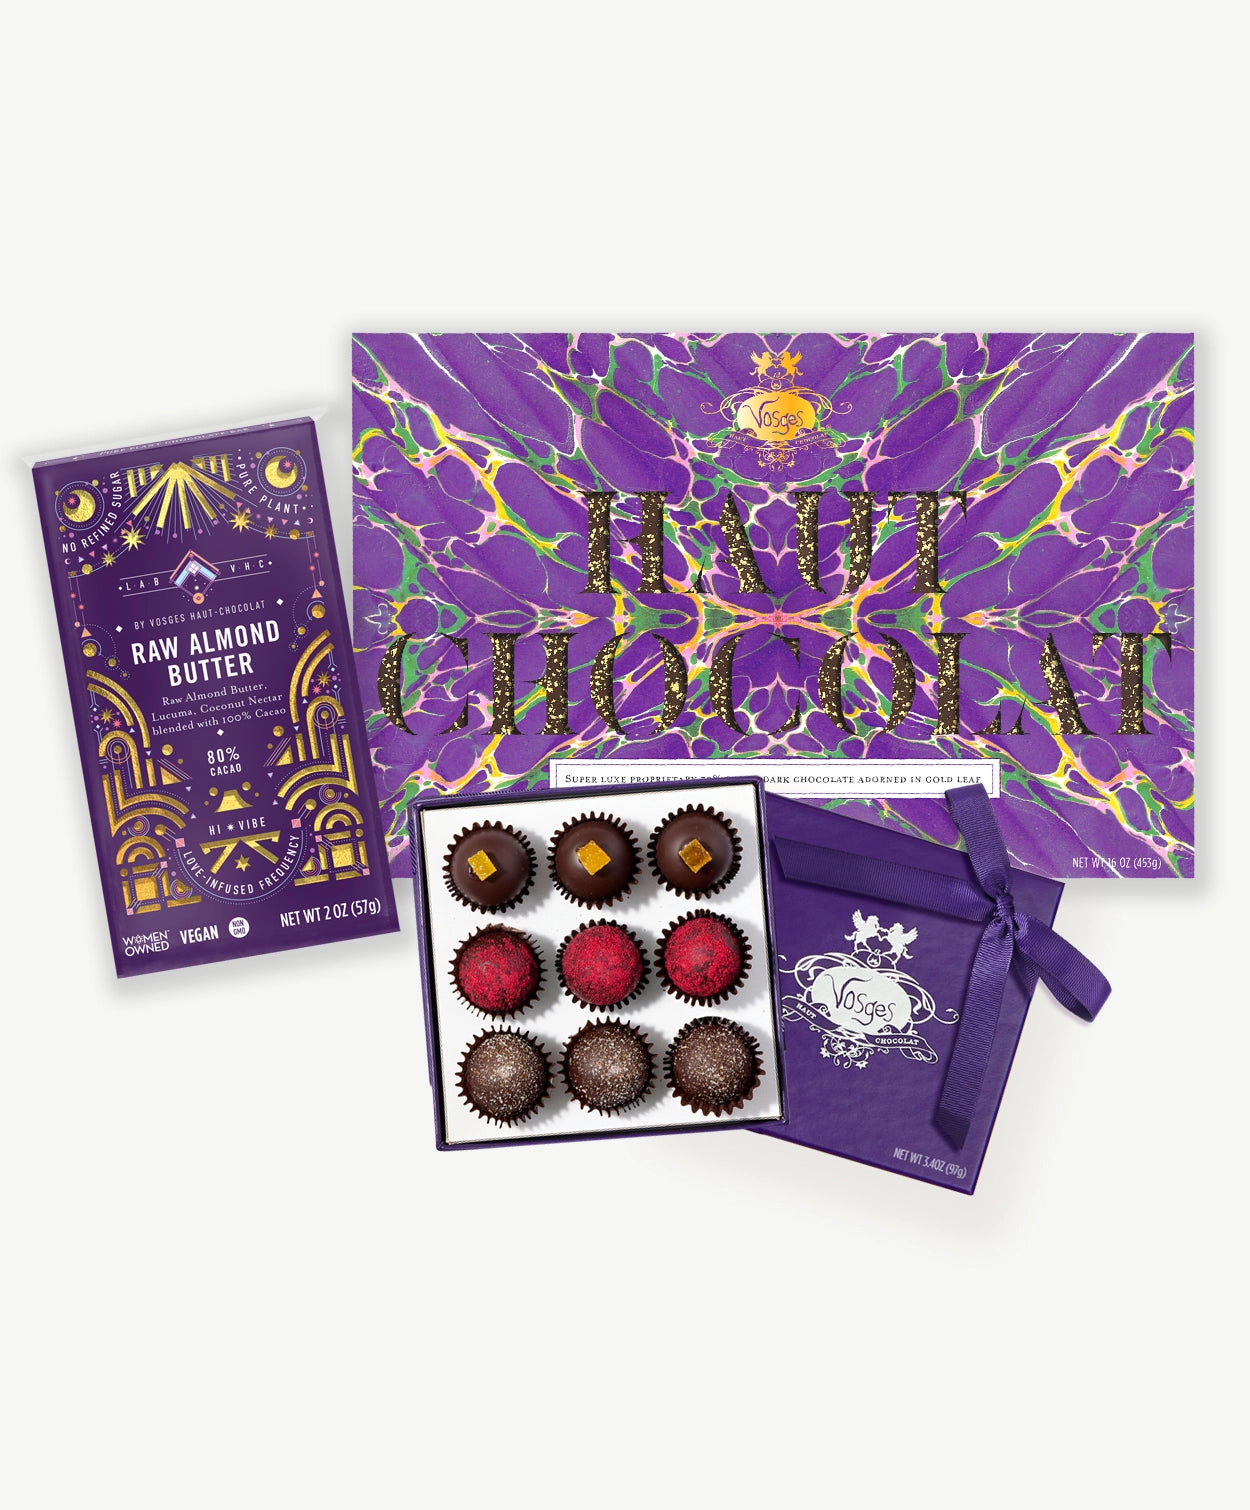 A large collection of Vosges Vegan Chocolate containing brightly colored truffles a raw almond butter bar and a 2 lb chocolate bar on a light grey background.